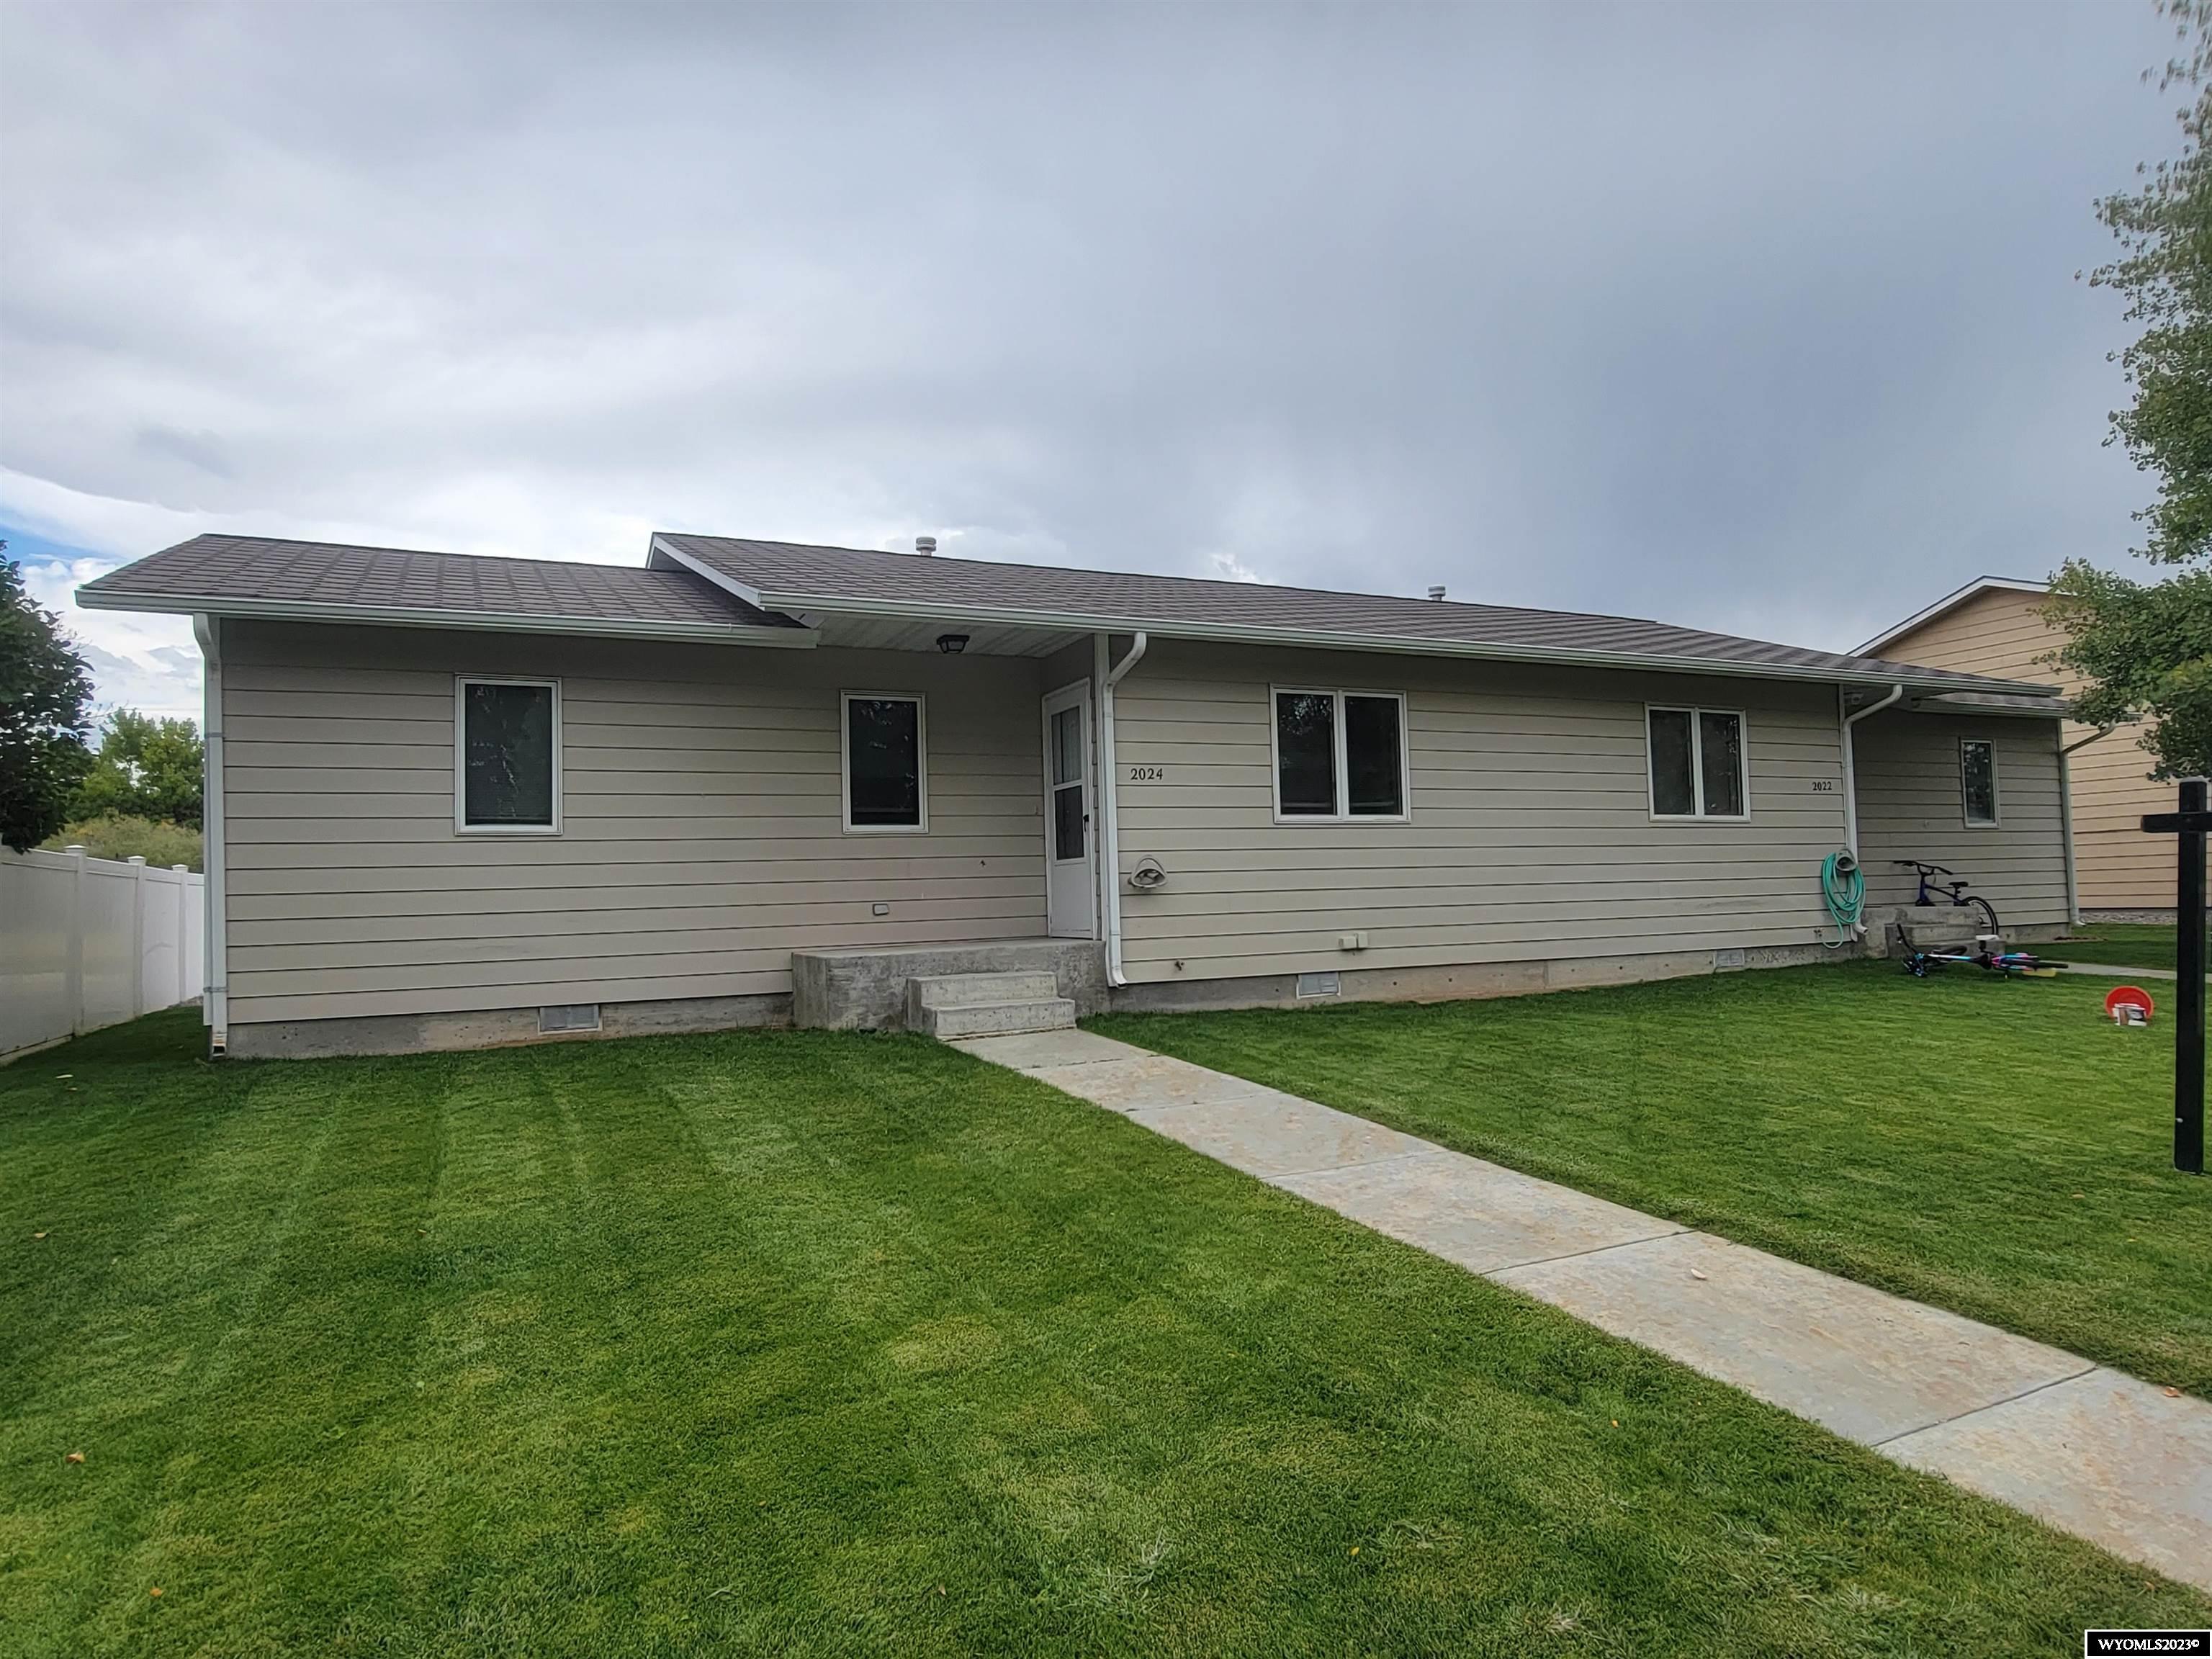 Great 3 bedroom 1 1/2 bath duplex. Rent is currently $700.00 per unit per month with renter responsible for Gas & Electric.  Seller is currently paying for City of Worland Utilities which include water & trash.  Only 2022 is rented at this time.